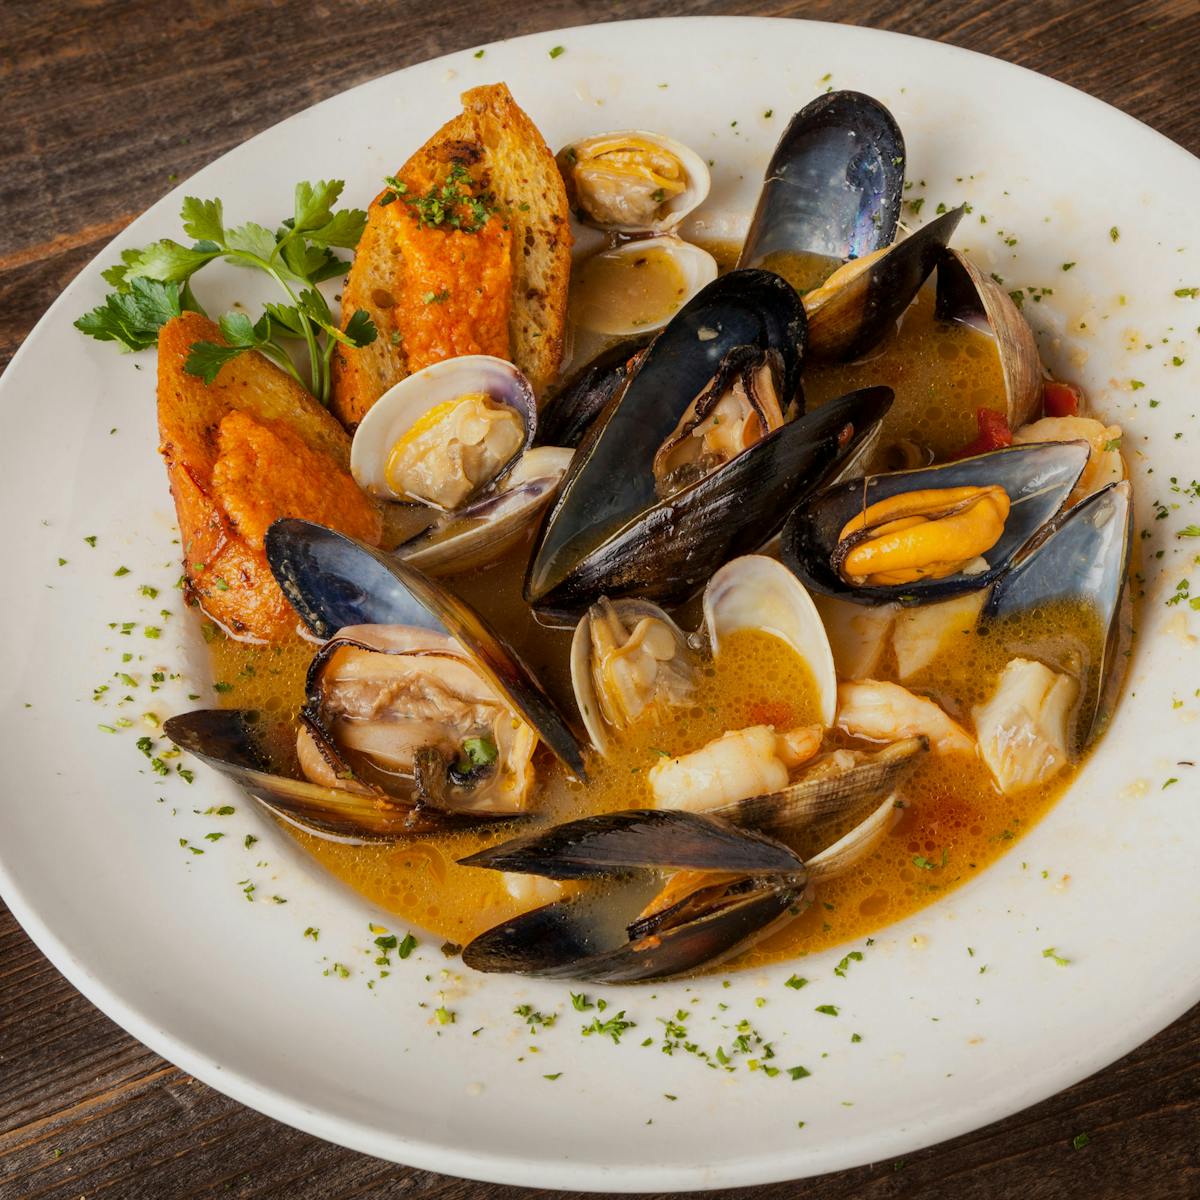 Italy’s Cioppino in a zesty marinara sauce with clams, mussels, calamari, shrimp, scallops and fish